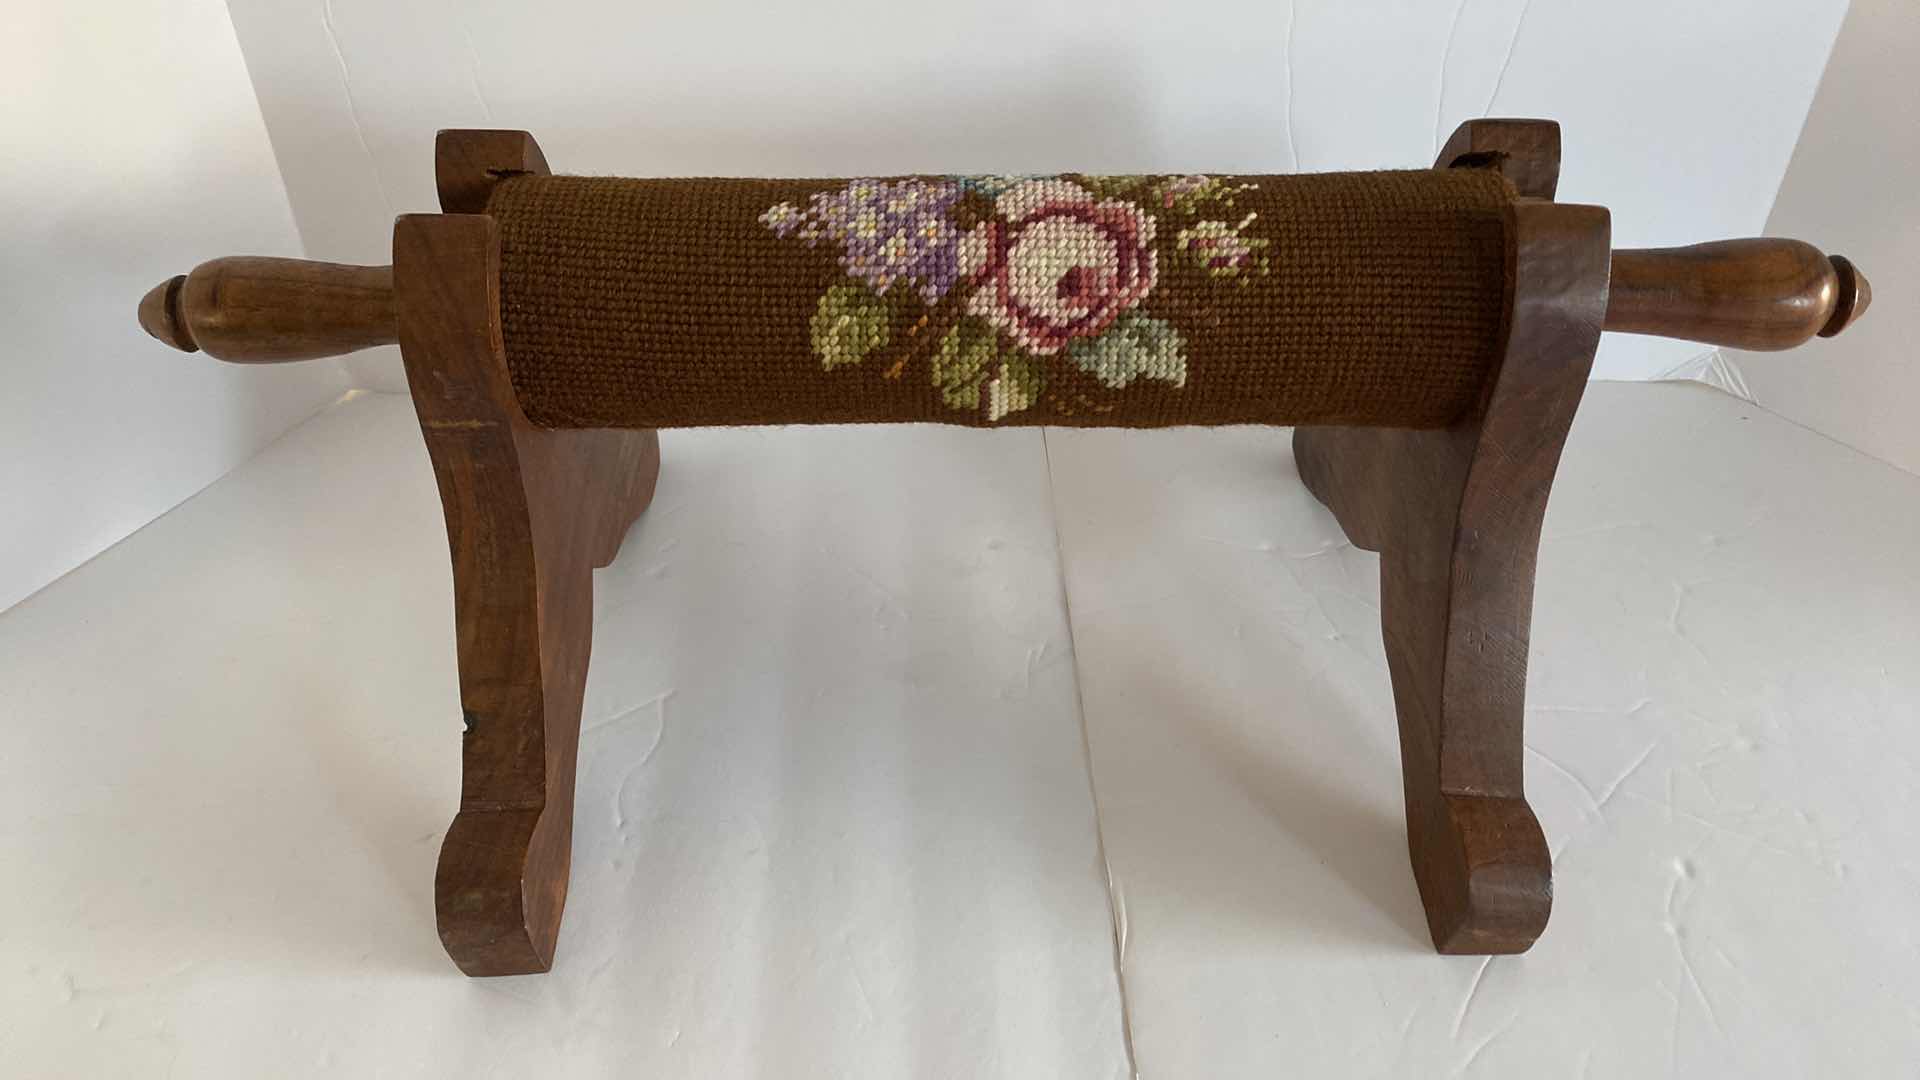 Photo 1 of ANTIQUE ROLLING PIN DECOR WITH NEEDLEPOINT